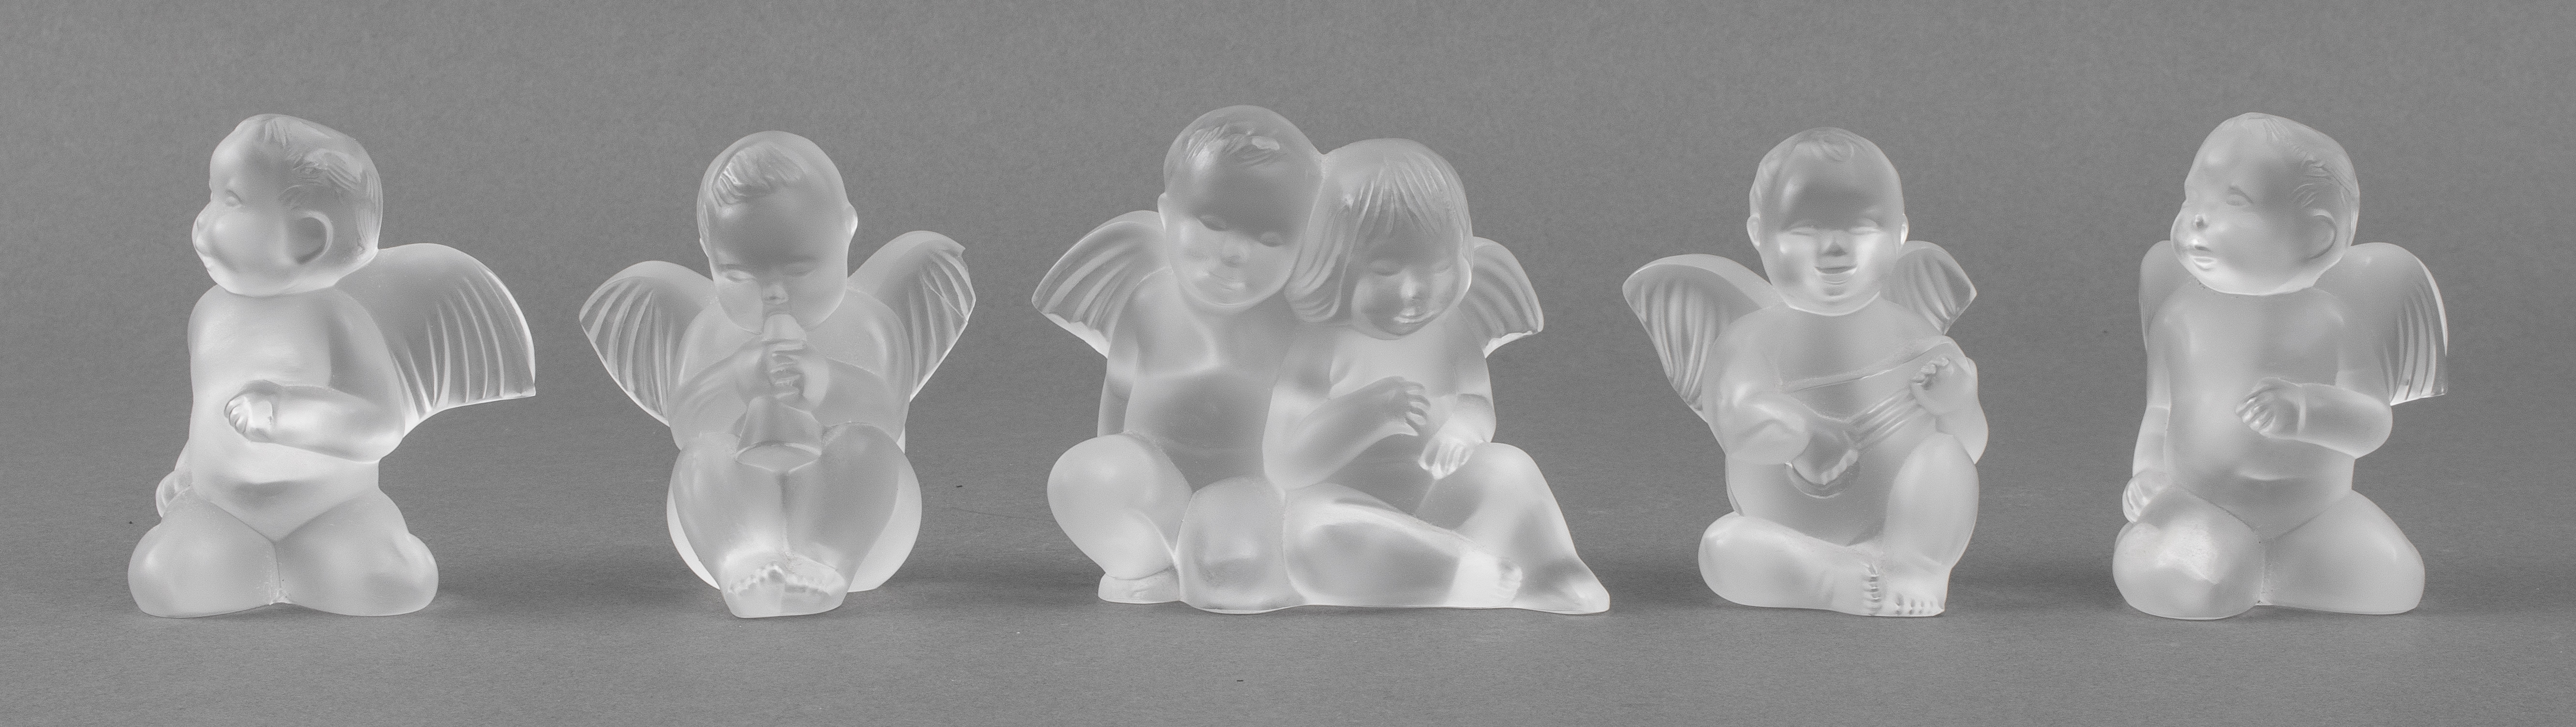 LALIQUE FRENCH ART GLASS ANGELS  2bc9b1